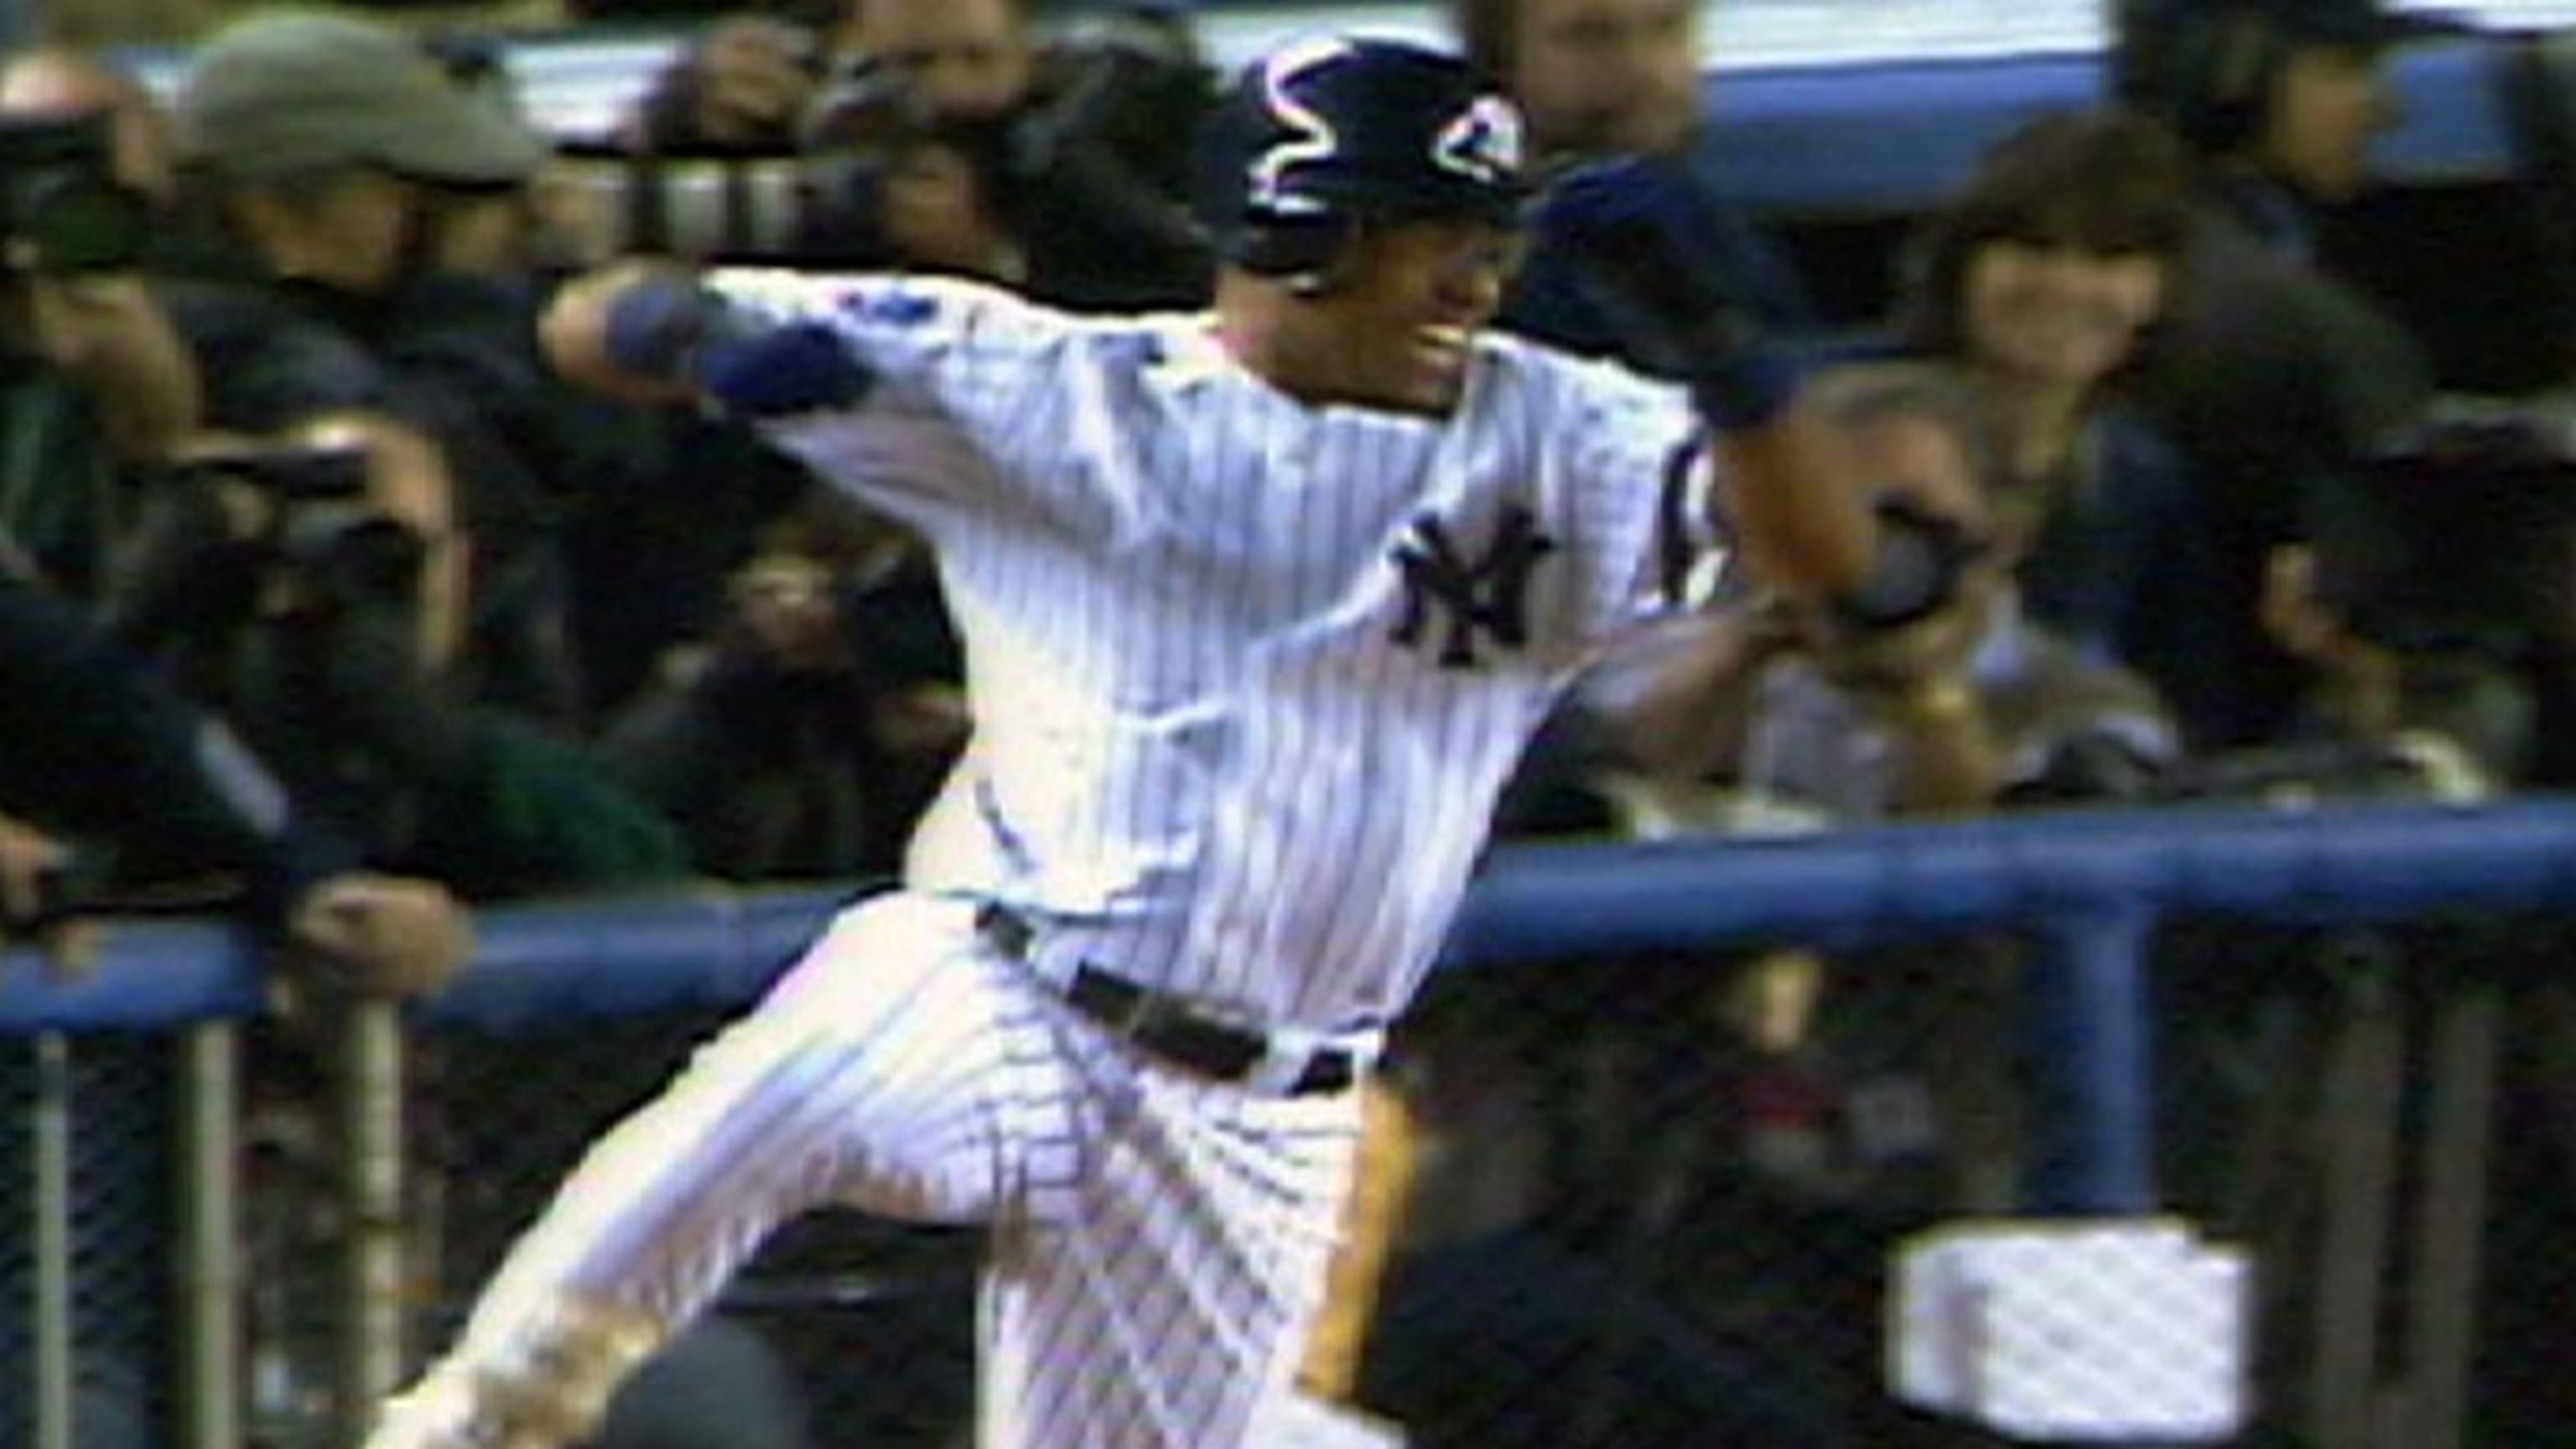 19 years ago today, Yankees outfielder Paul O'Neill got his 2,000